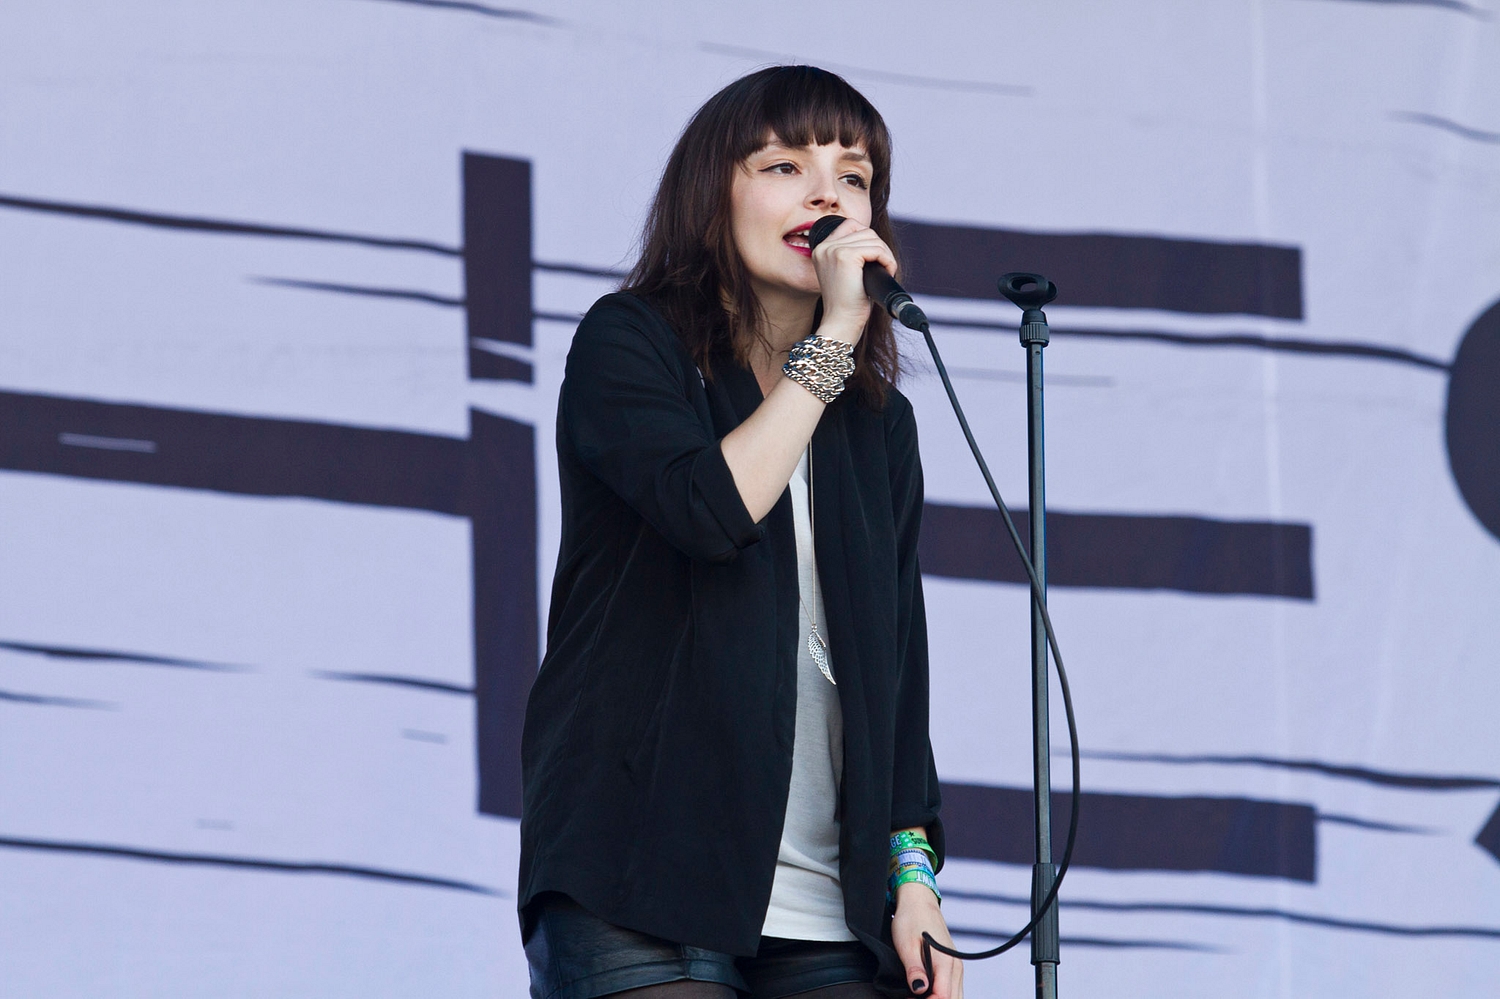 T in the Park 2014